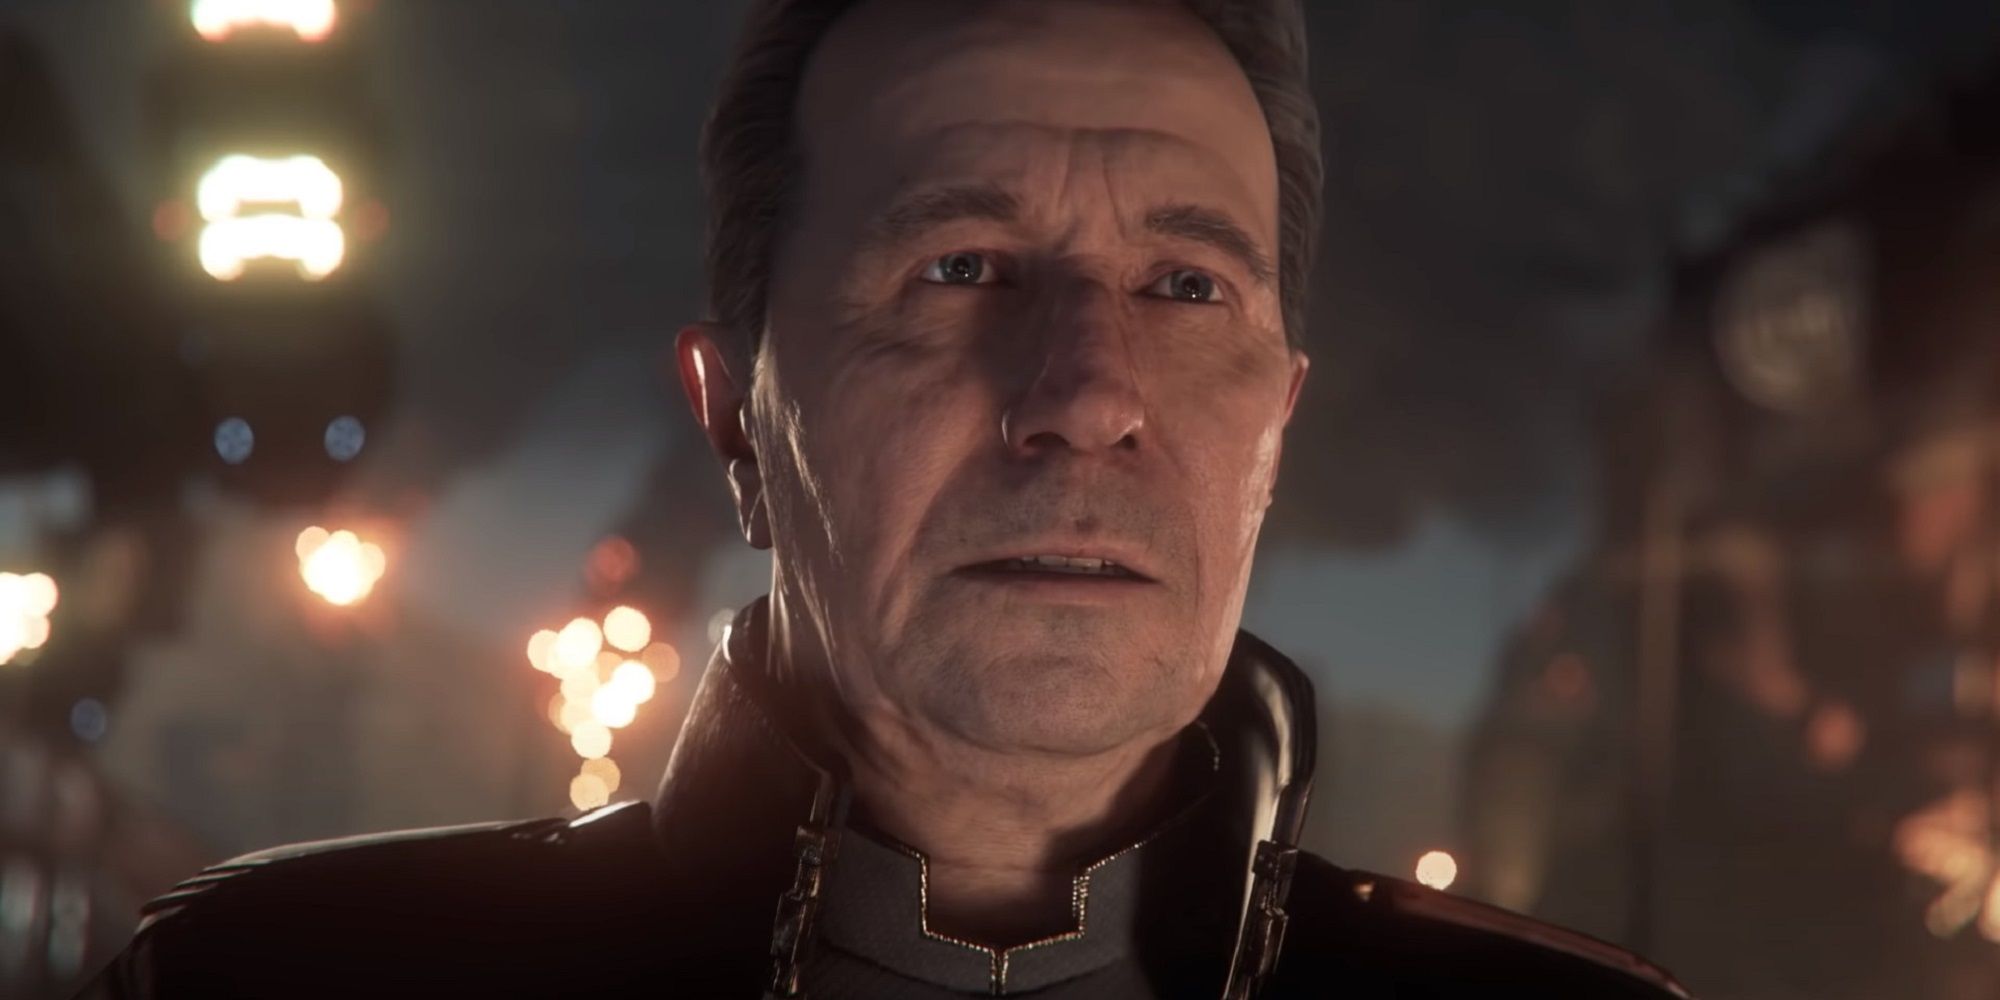 Squadron 42 cinematic showing Gary Oldman's character.